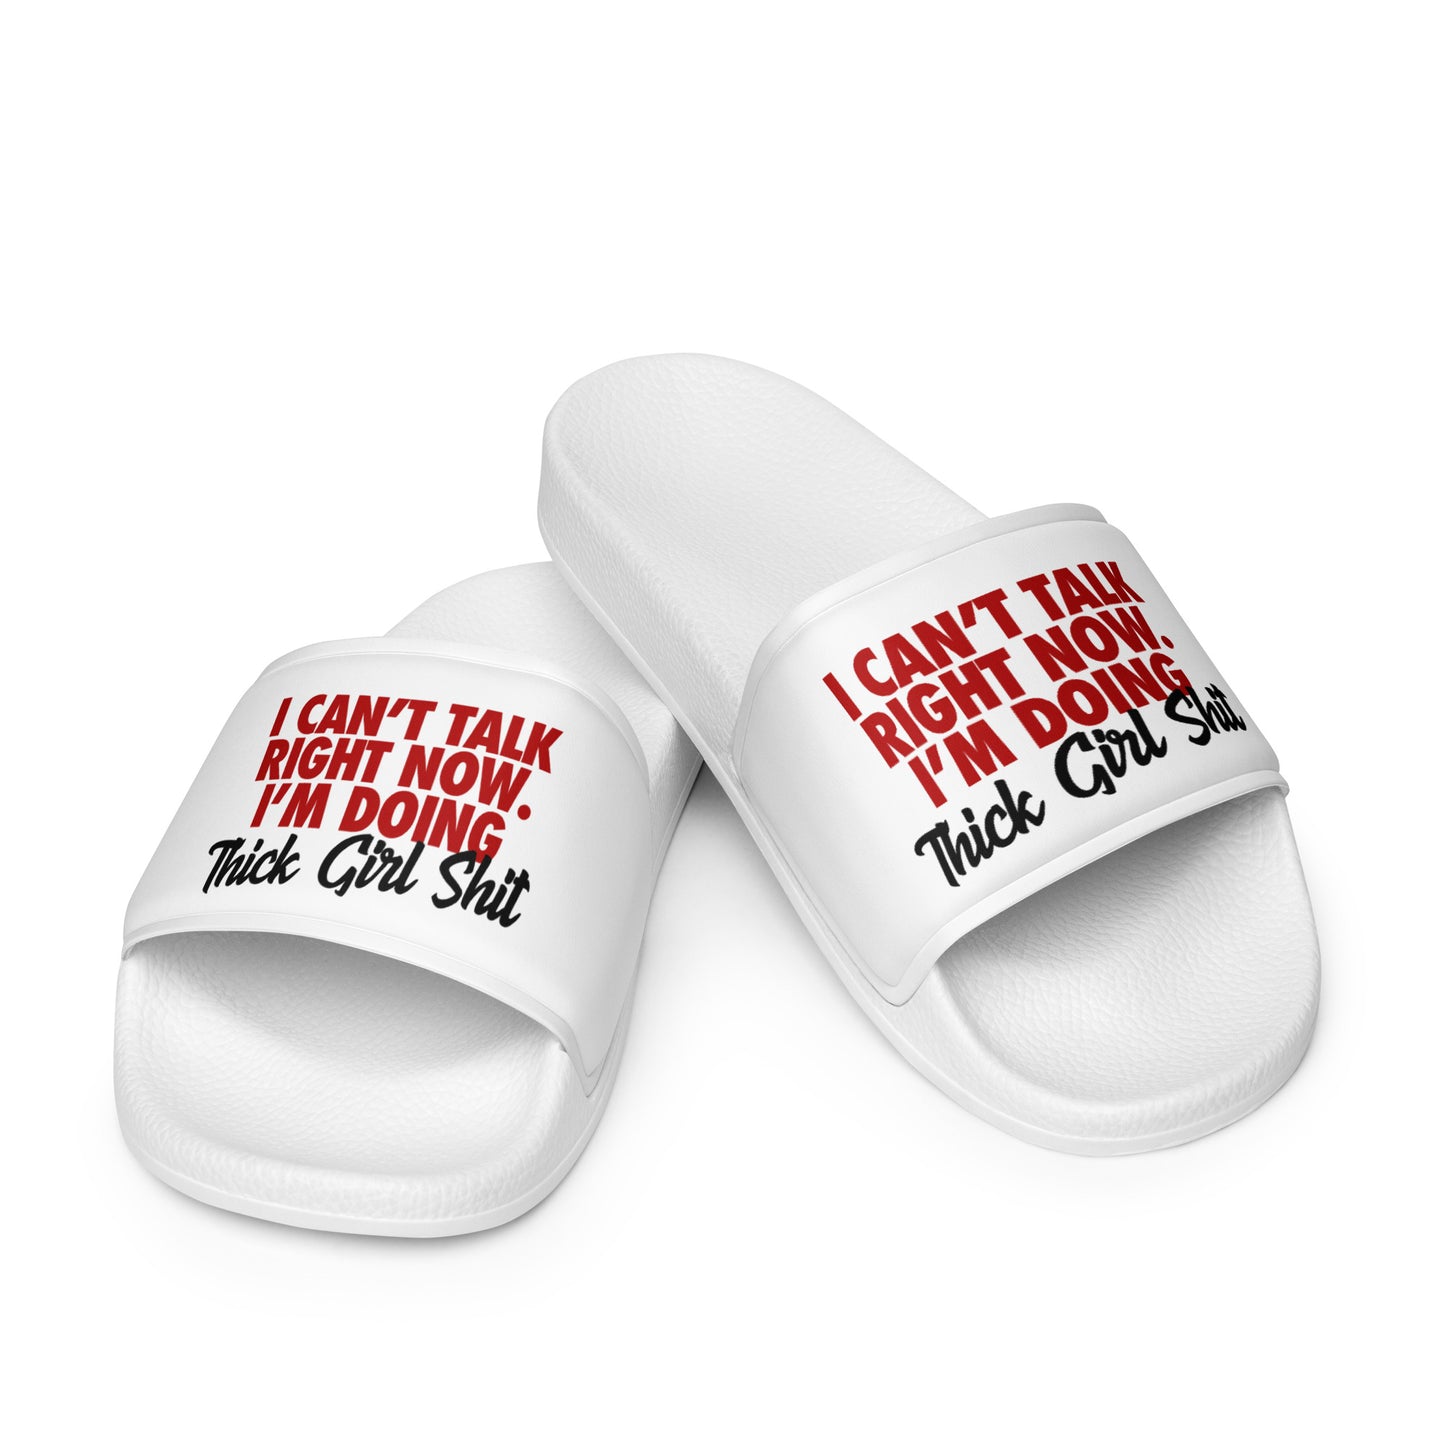 The THICK Girl Gang Ish Women's Slides